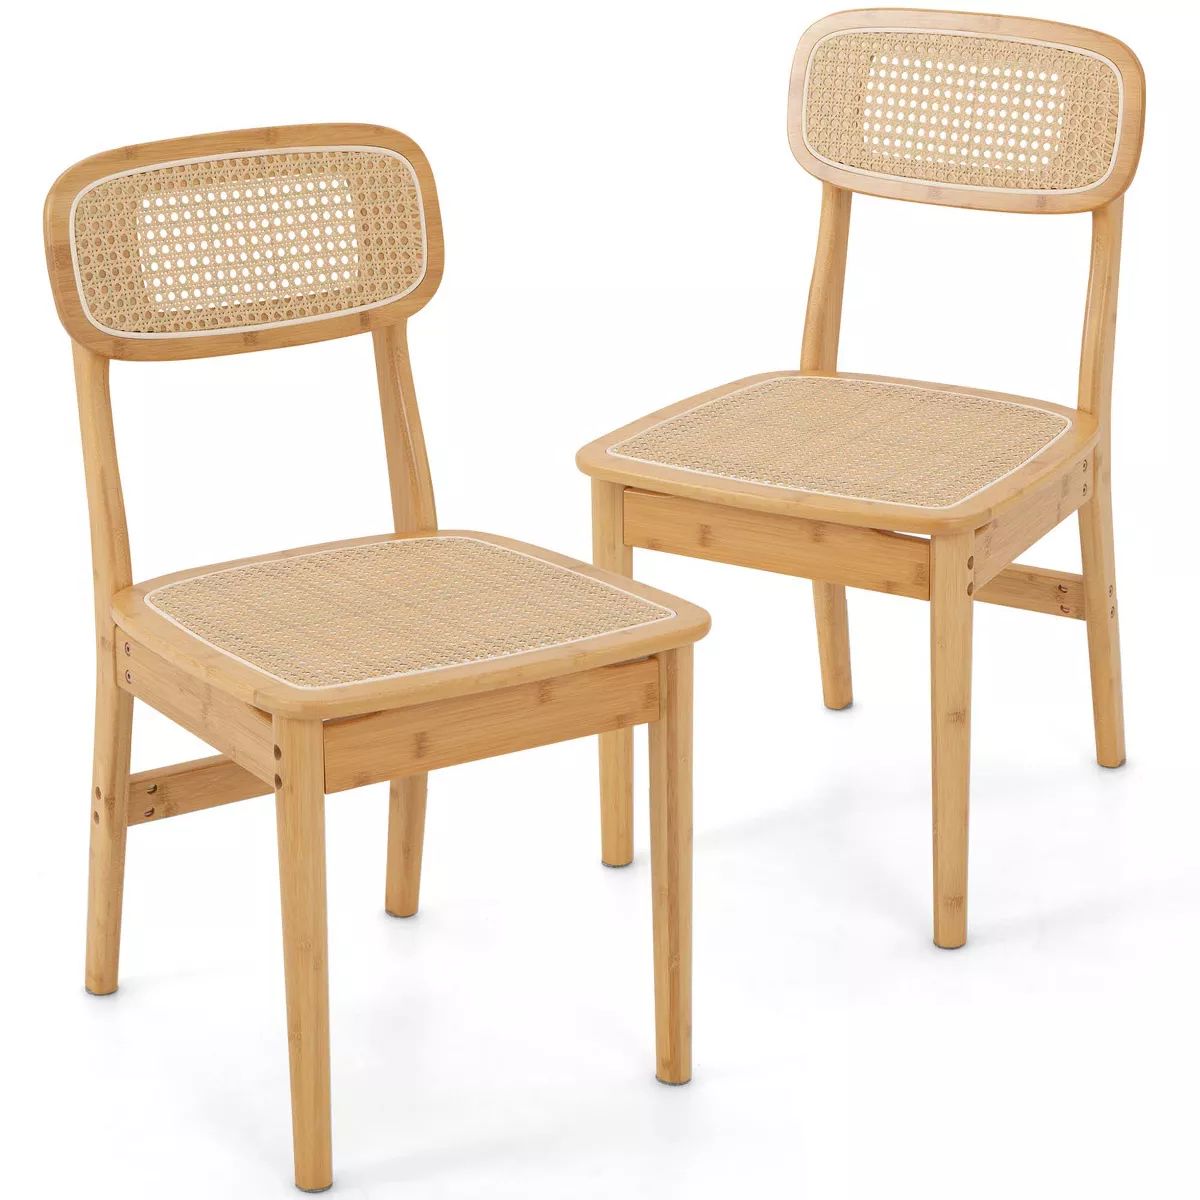 Costway Rattan Accent Chairs Set of 2 Bamboo Frame Cane Woven Backrest &Seat Dining Room | Target